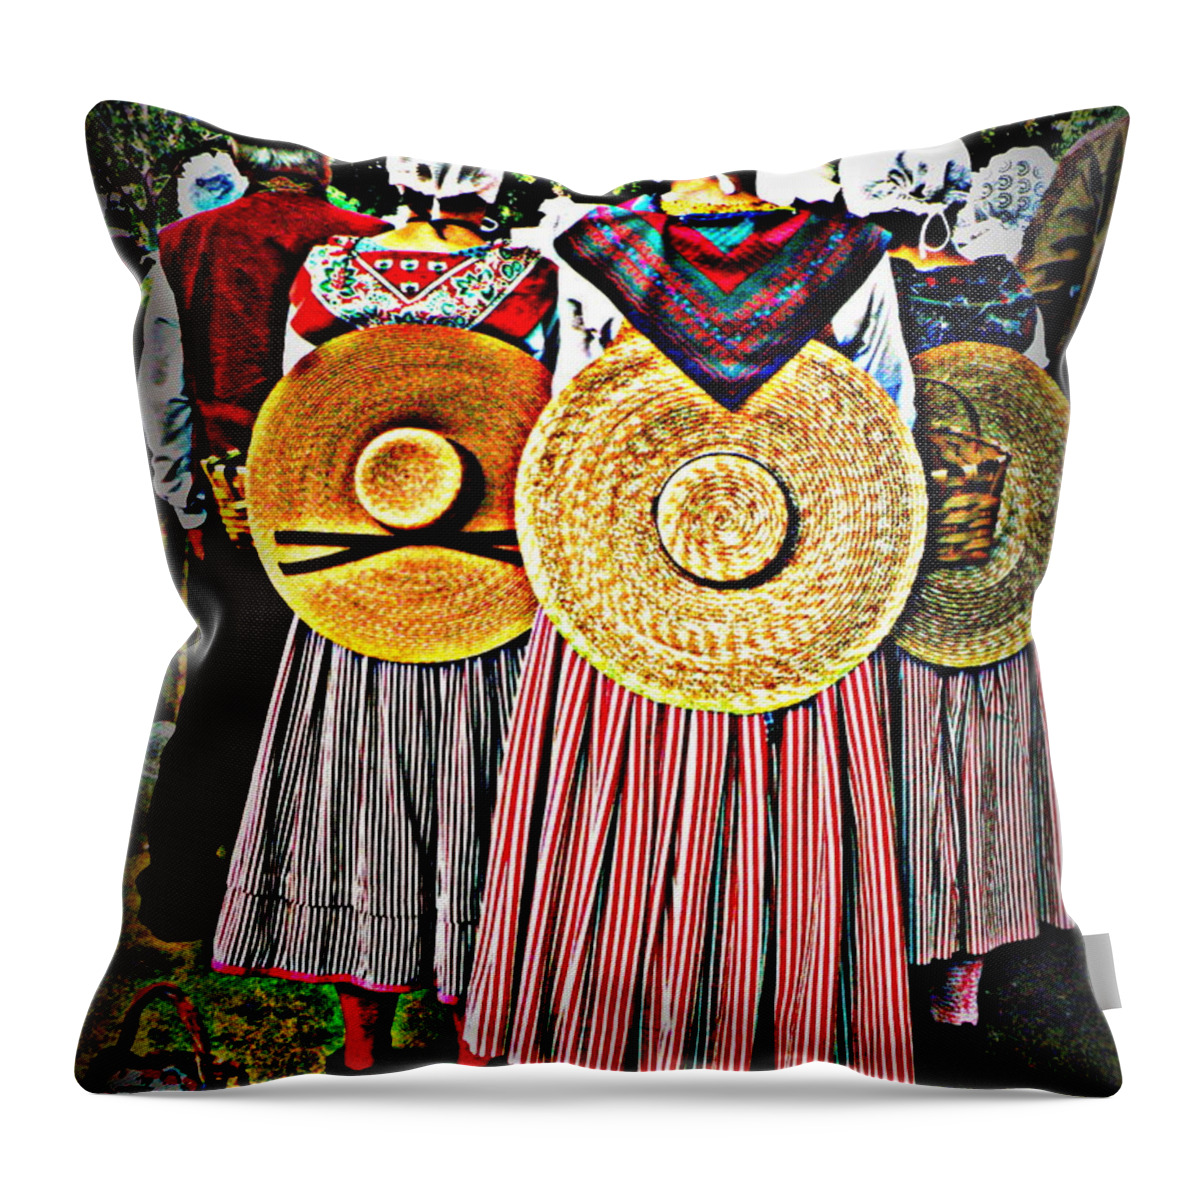 Provence Throw Pillow featuring the photograph Provence Traditional Costumes by Lainie Wrightson